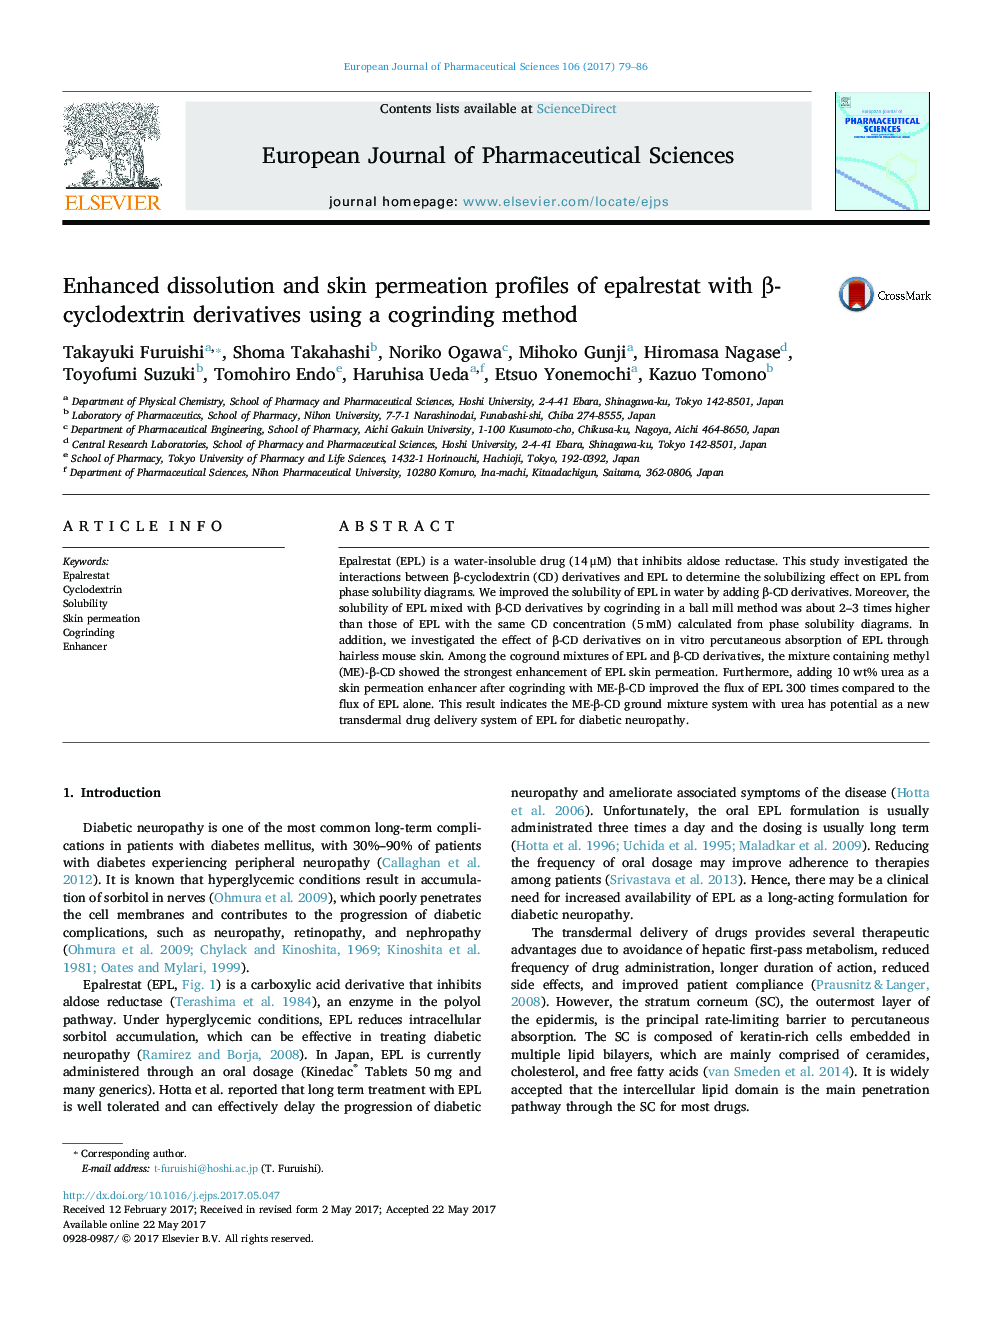 Enhanced dissolution and skin permeation profiles of epalrestat with Î²-cyclodextrin derivatives using a cogrinding method